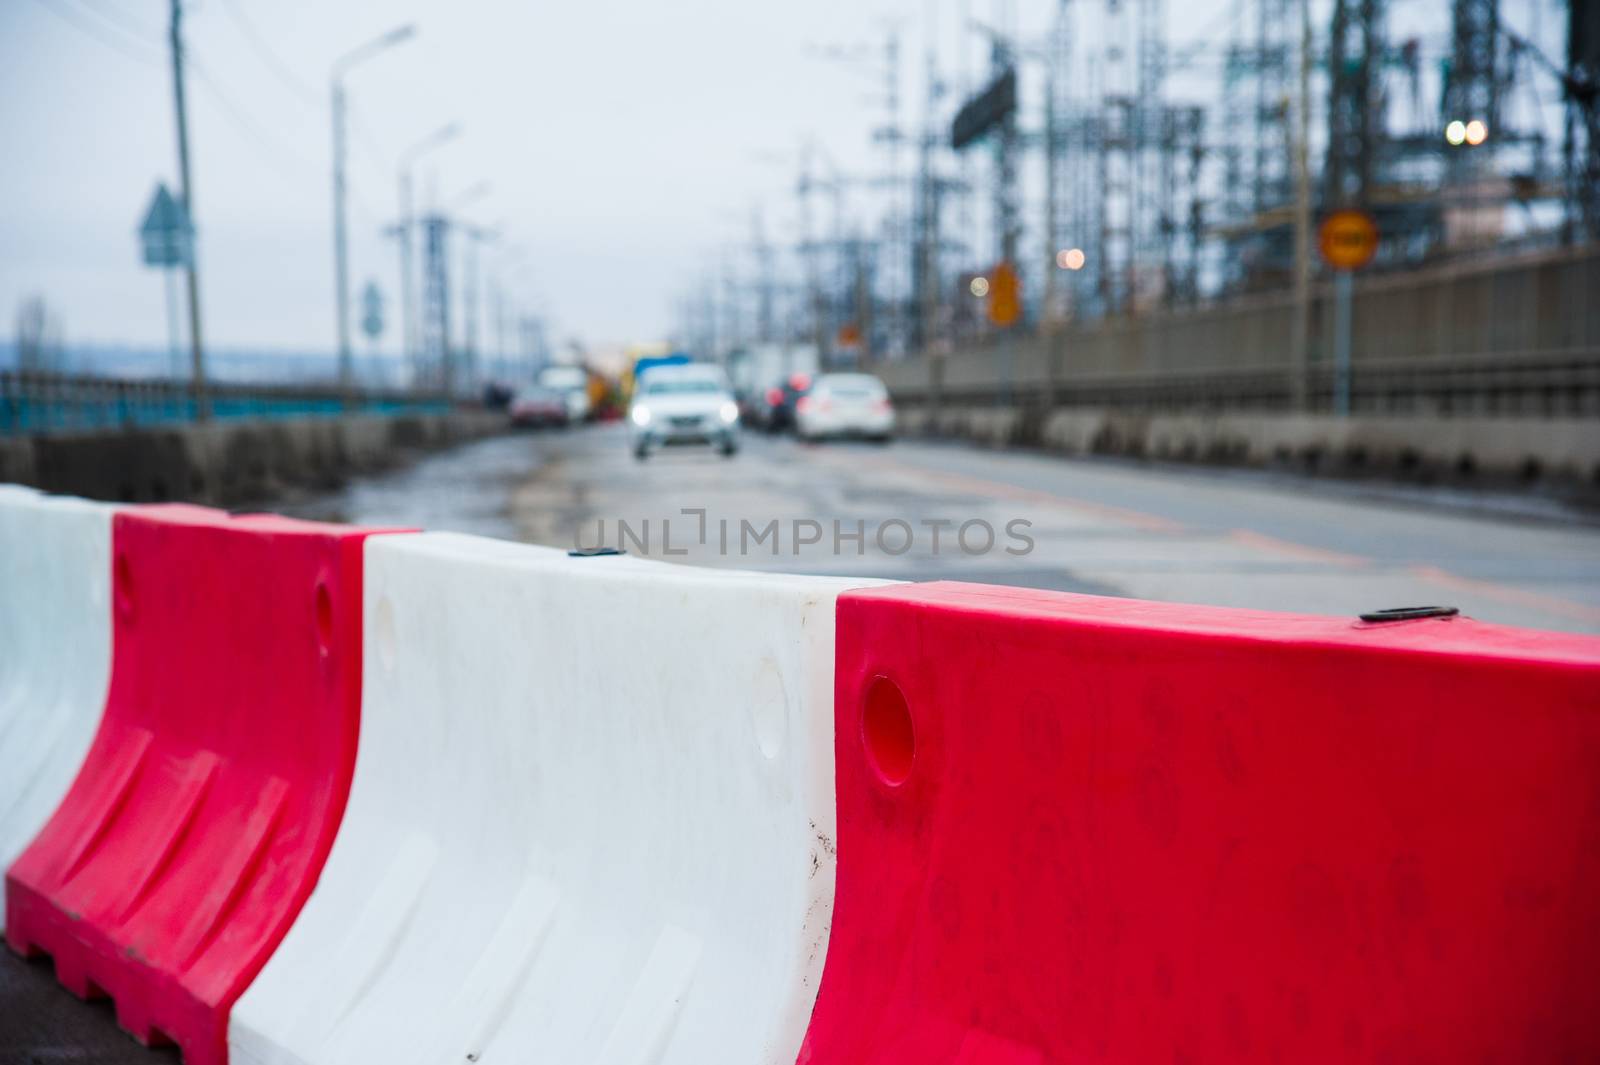 Orange construction light on barricade and red safety barriers o by grigorenko